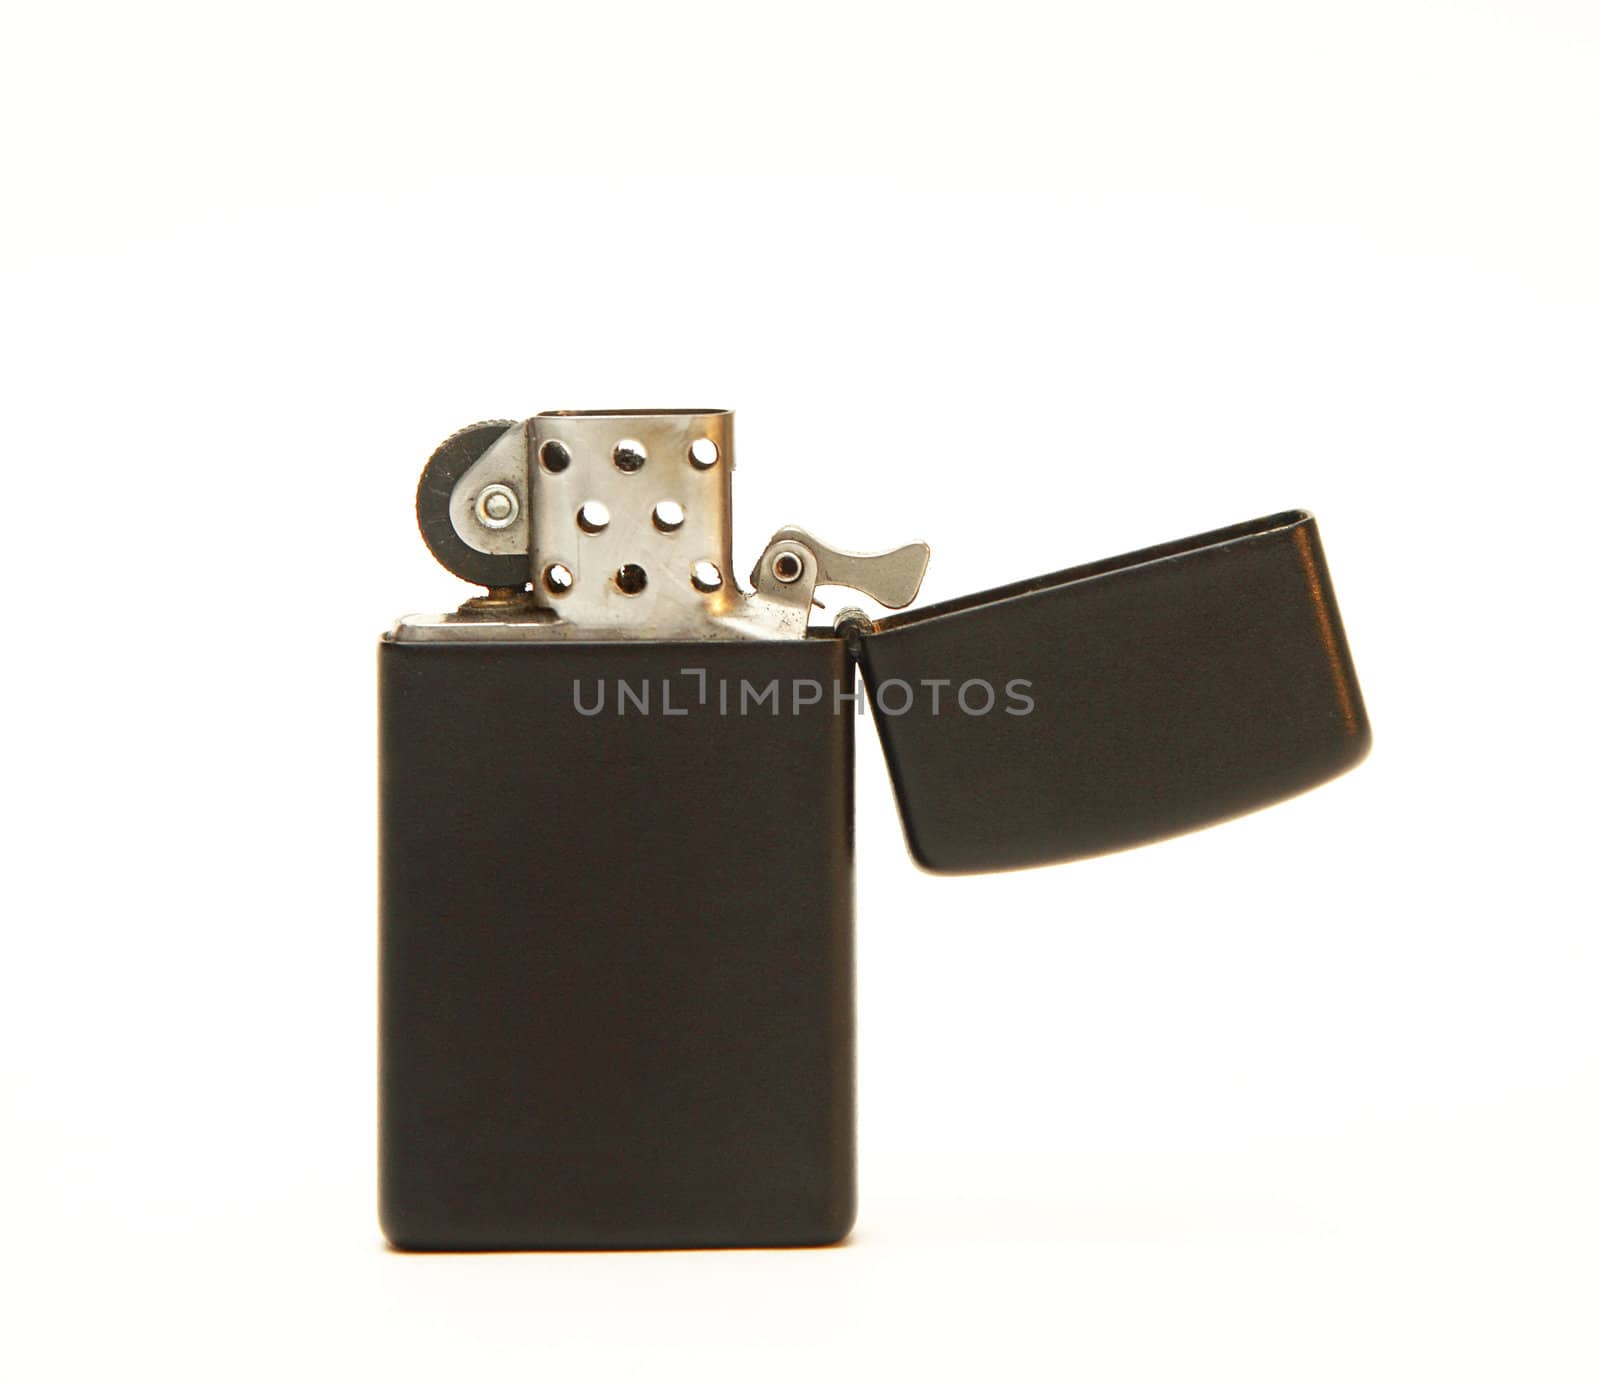 A black, open lighter on a white background.